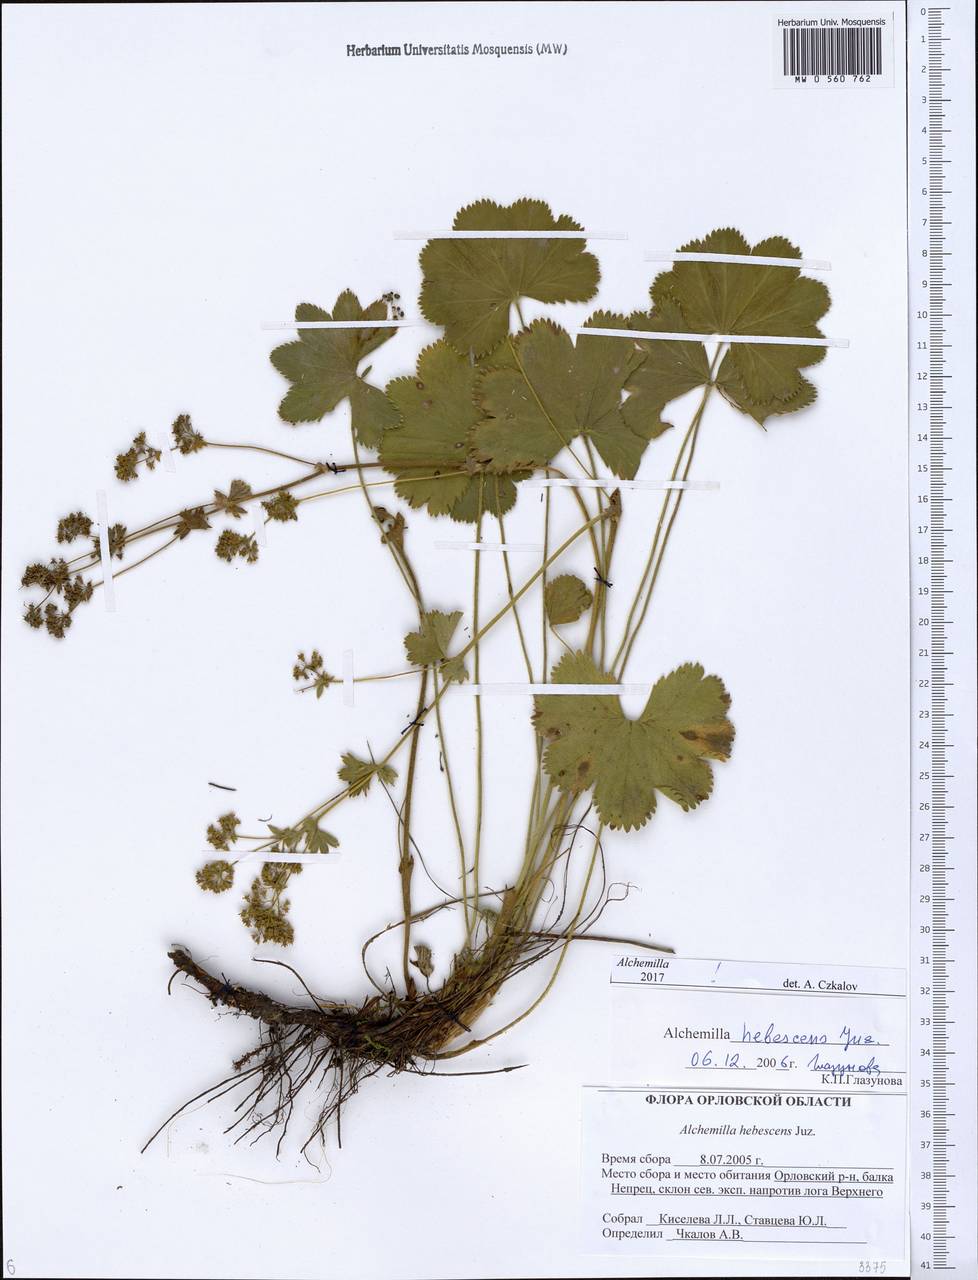 Alchemilla hebescens Juz., Eastern Europe, Central forest-and-steppe region (E6) (Russia)